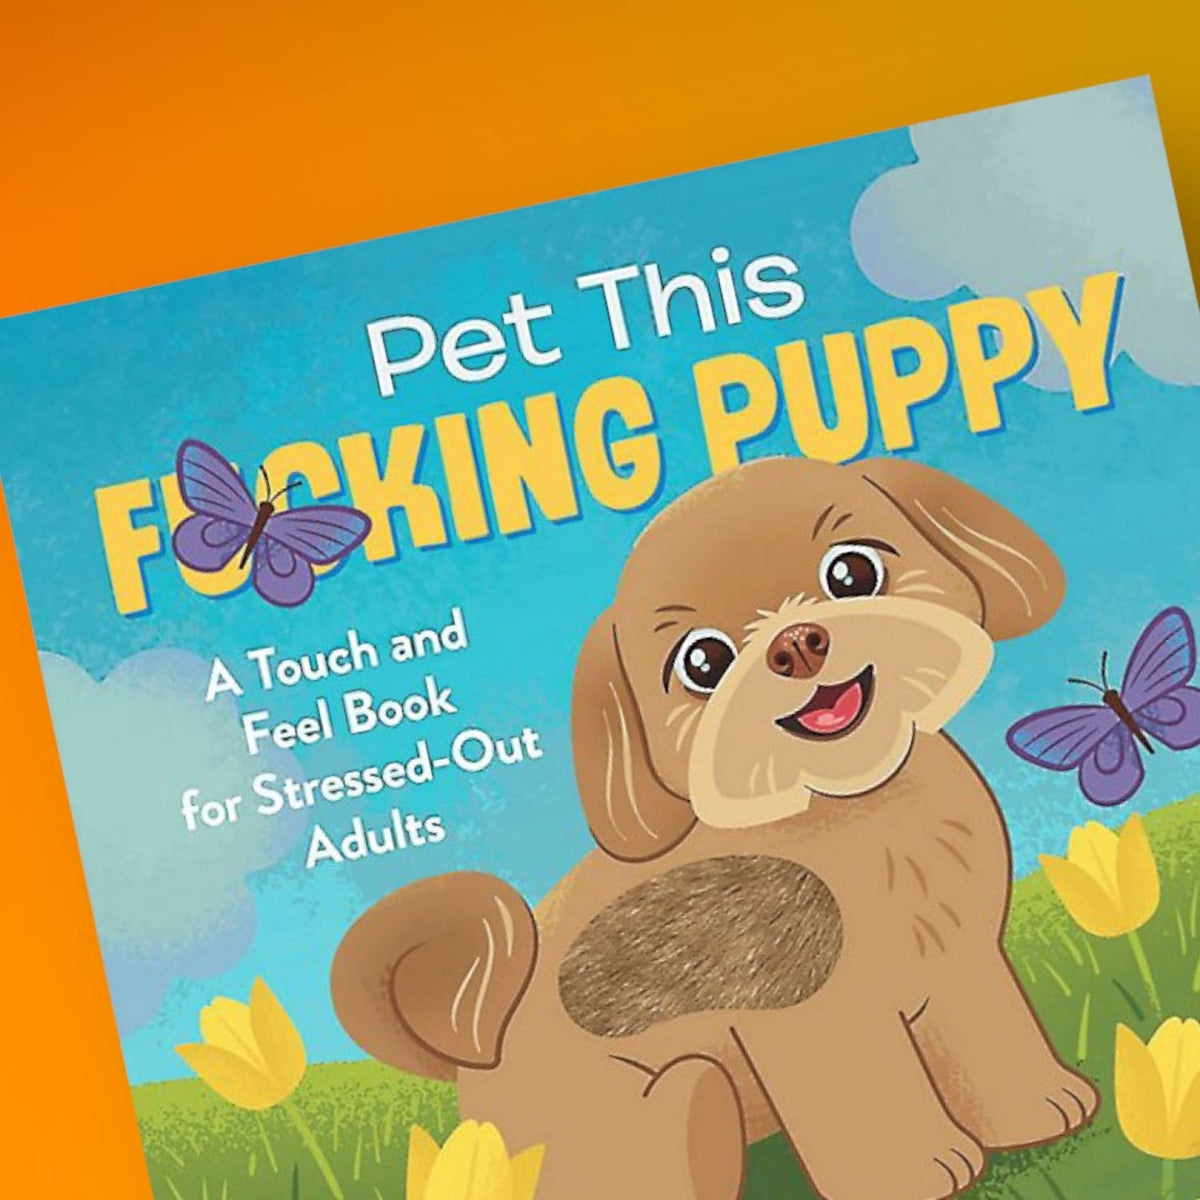 Pet This F*cking Puppy: a Touch-and-feel Book For